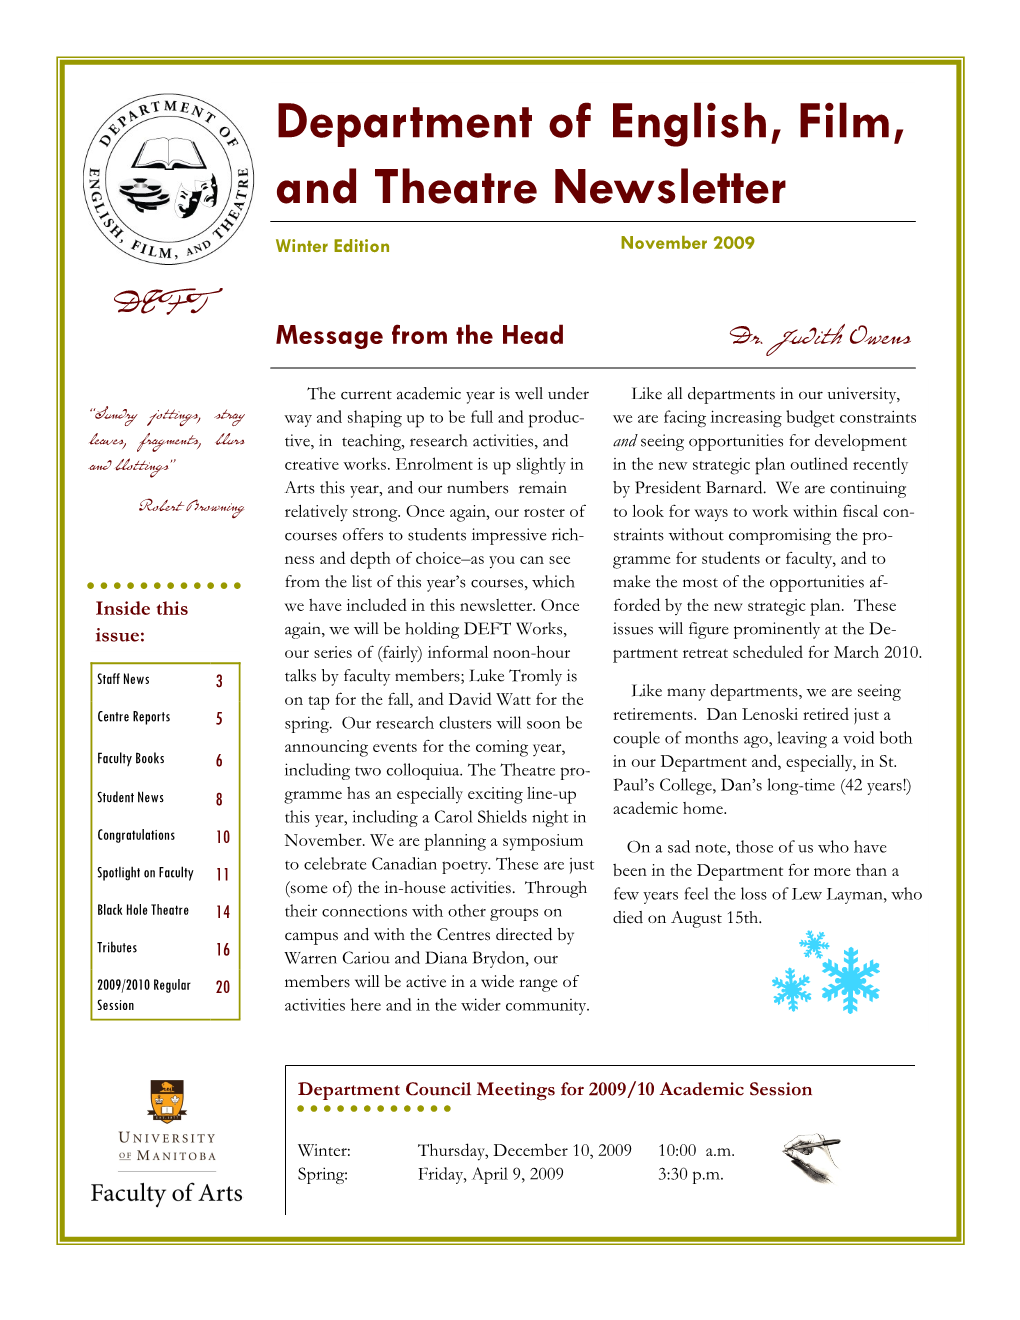 Department of English, Film, and Theatre Newsletter